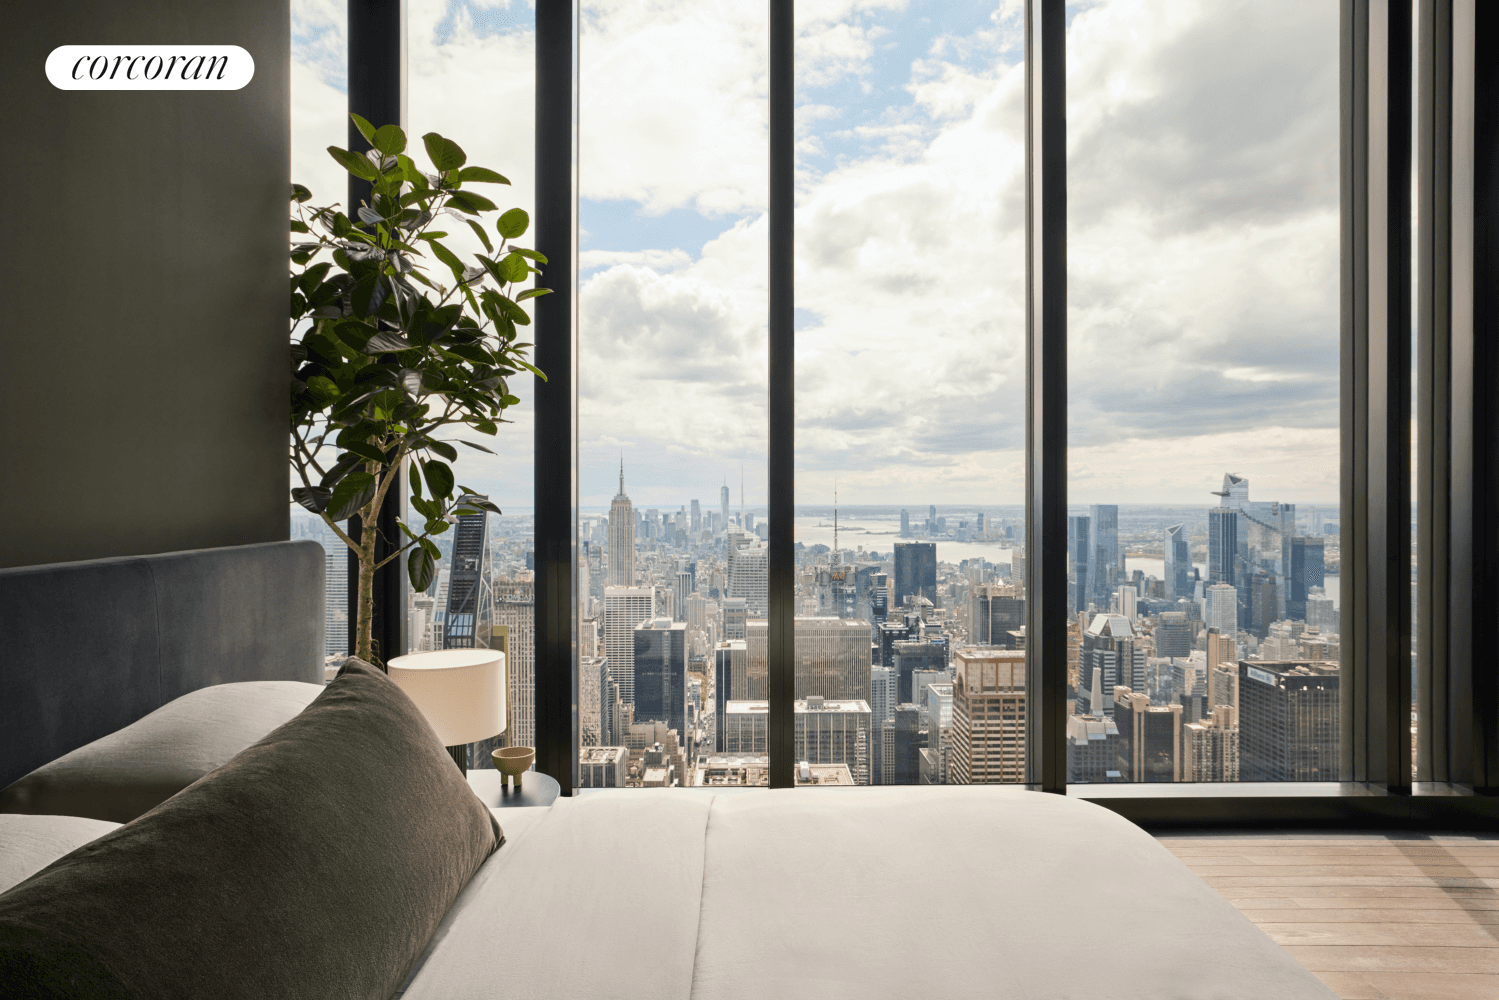 IMMEDIATE OCCUPANCYPenthouse 76 at 111 West 57th Street is a spectacular, one of a kind residence that offers the grandeur of expansive indoor outdoor living across two full floors, all ...